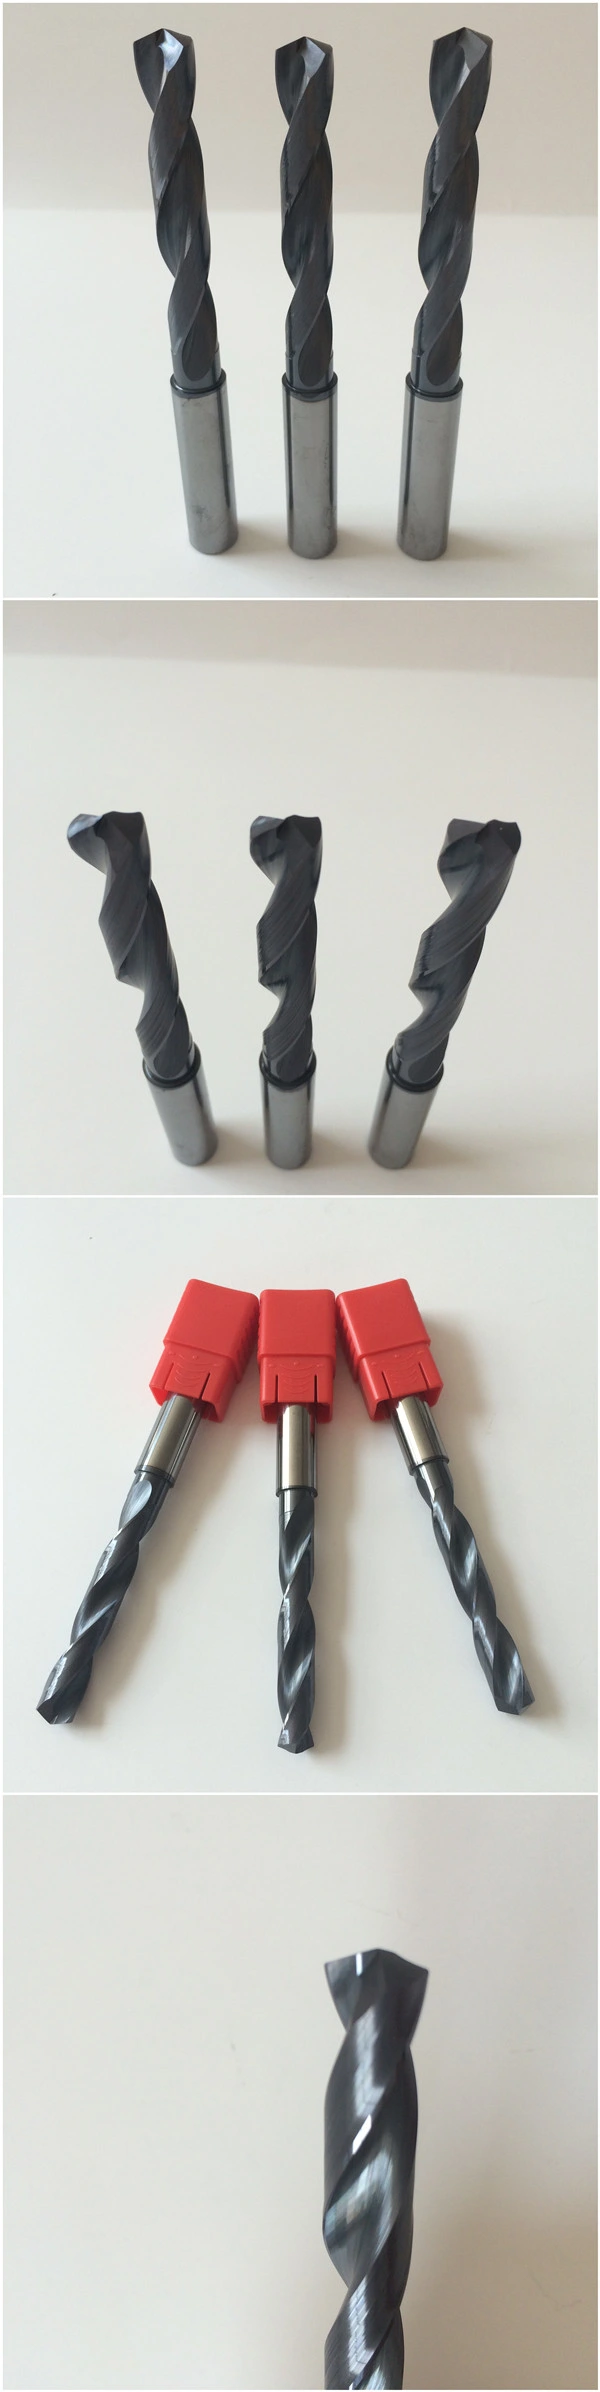 Better Quality Tungsten Carbide Drills for Hardened Metal